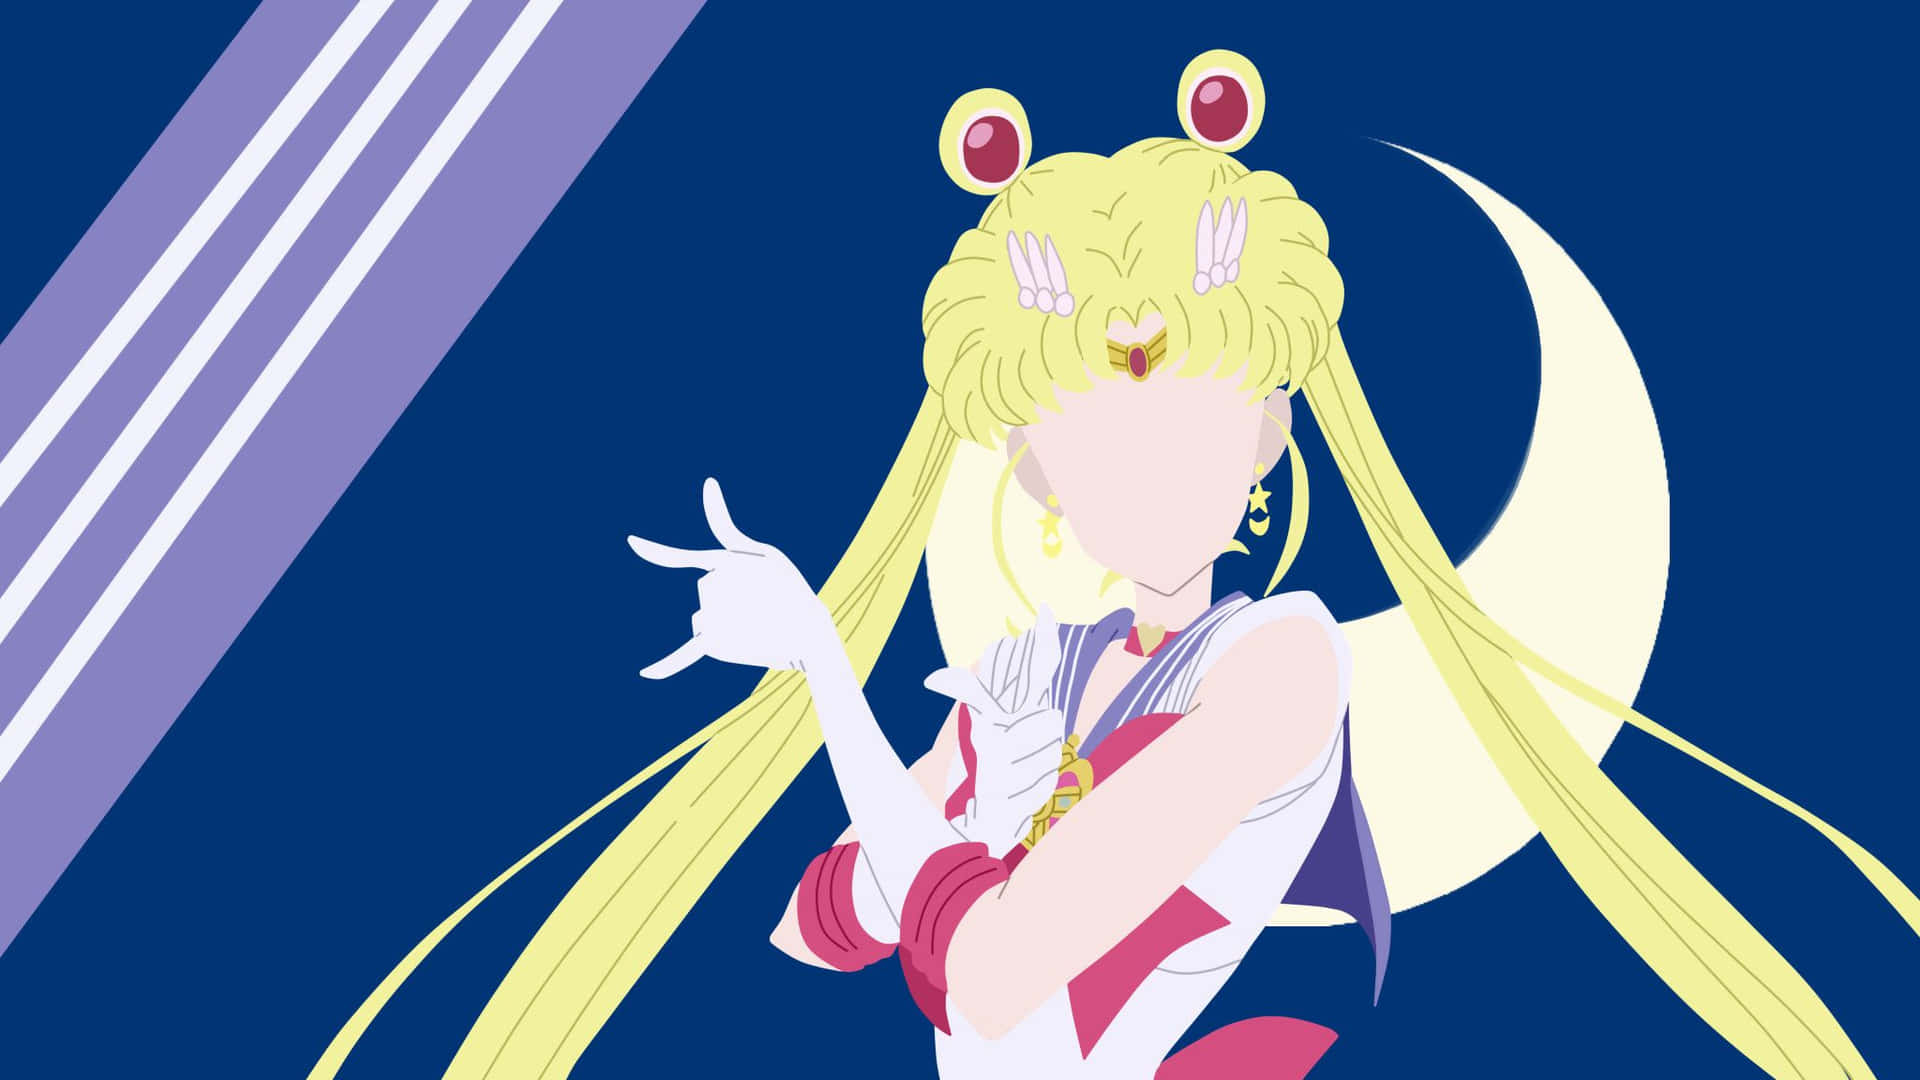 Admire the beauty of Aesthetic Sailor Moon Wallpaper